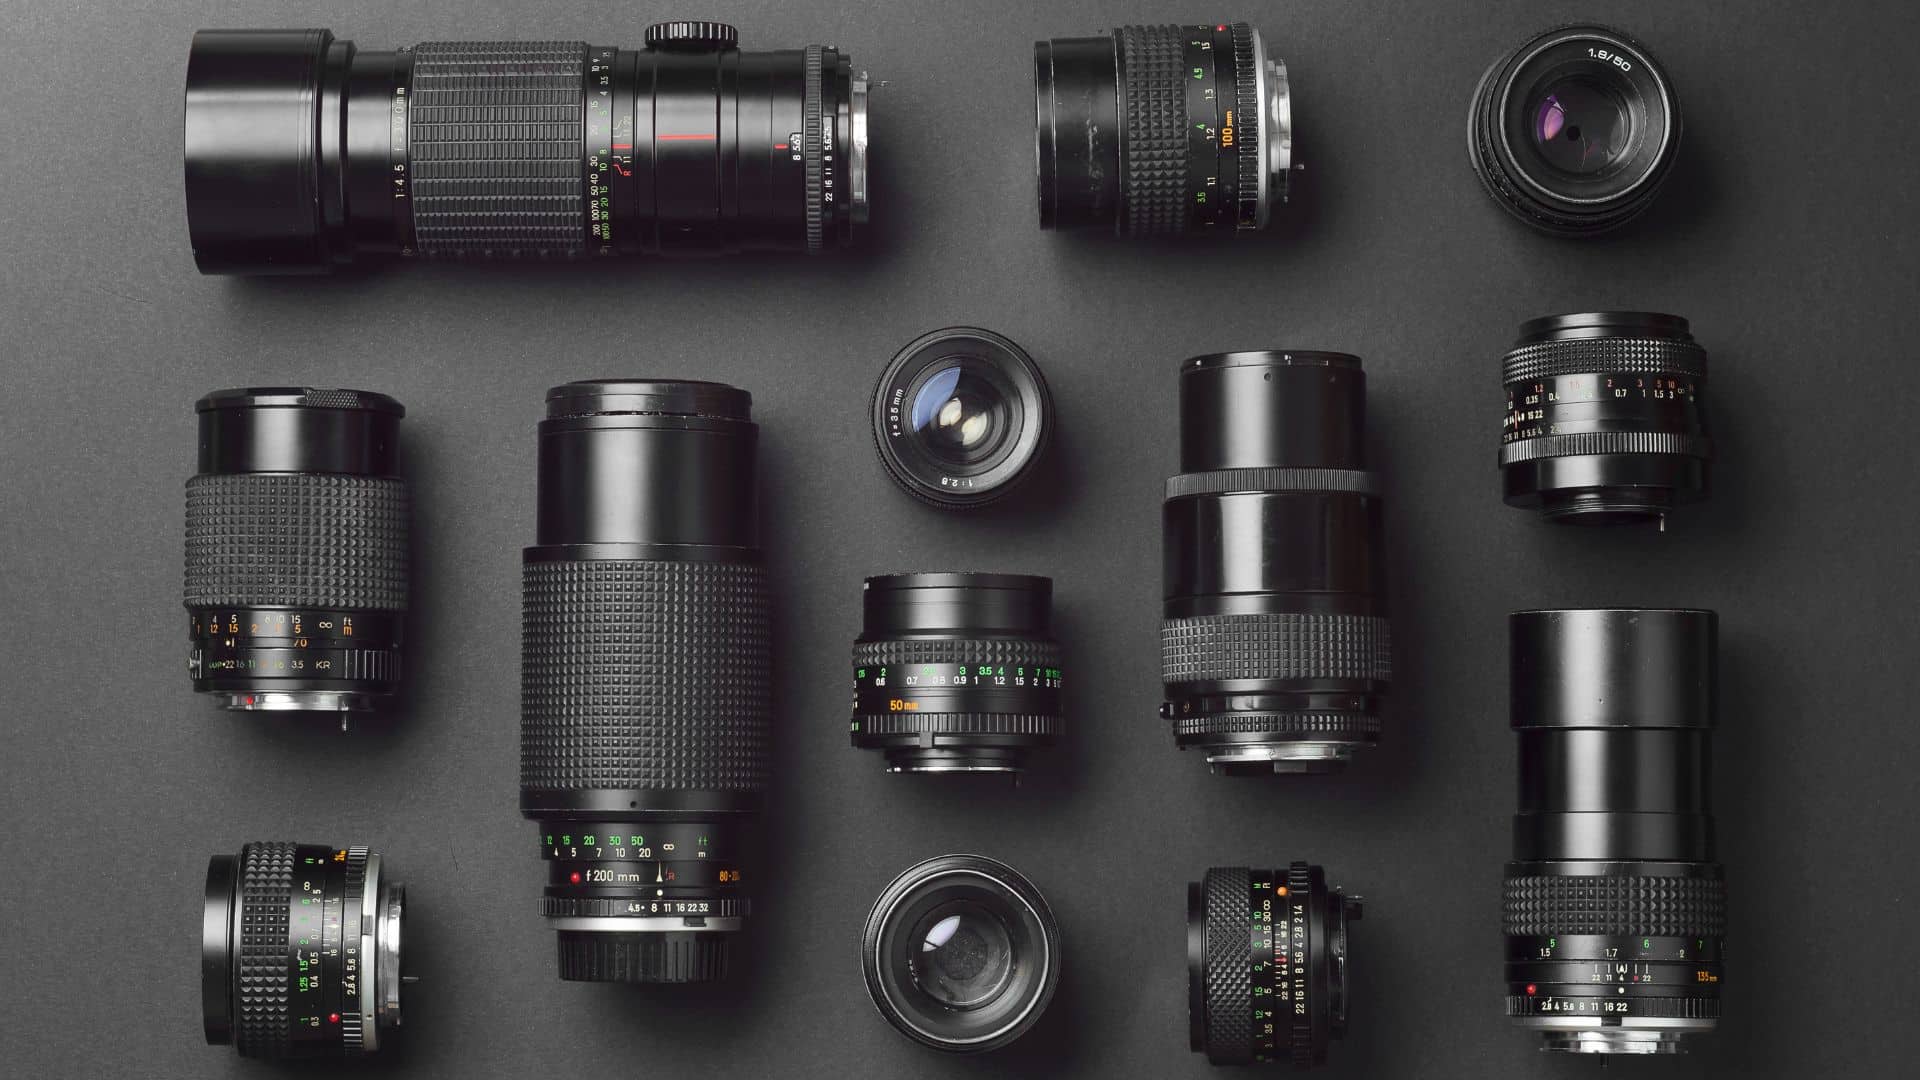 Are camera lenses interchangeable